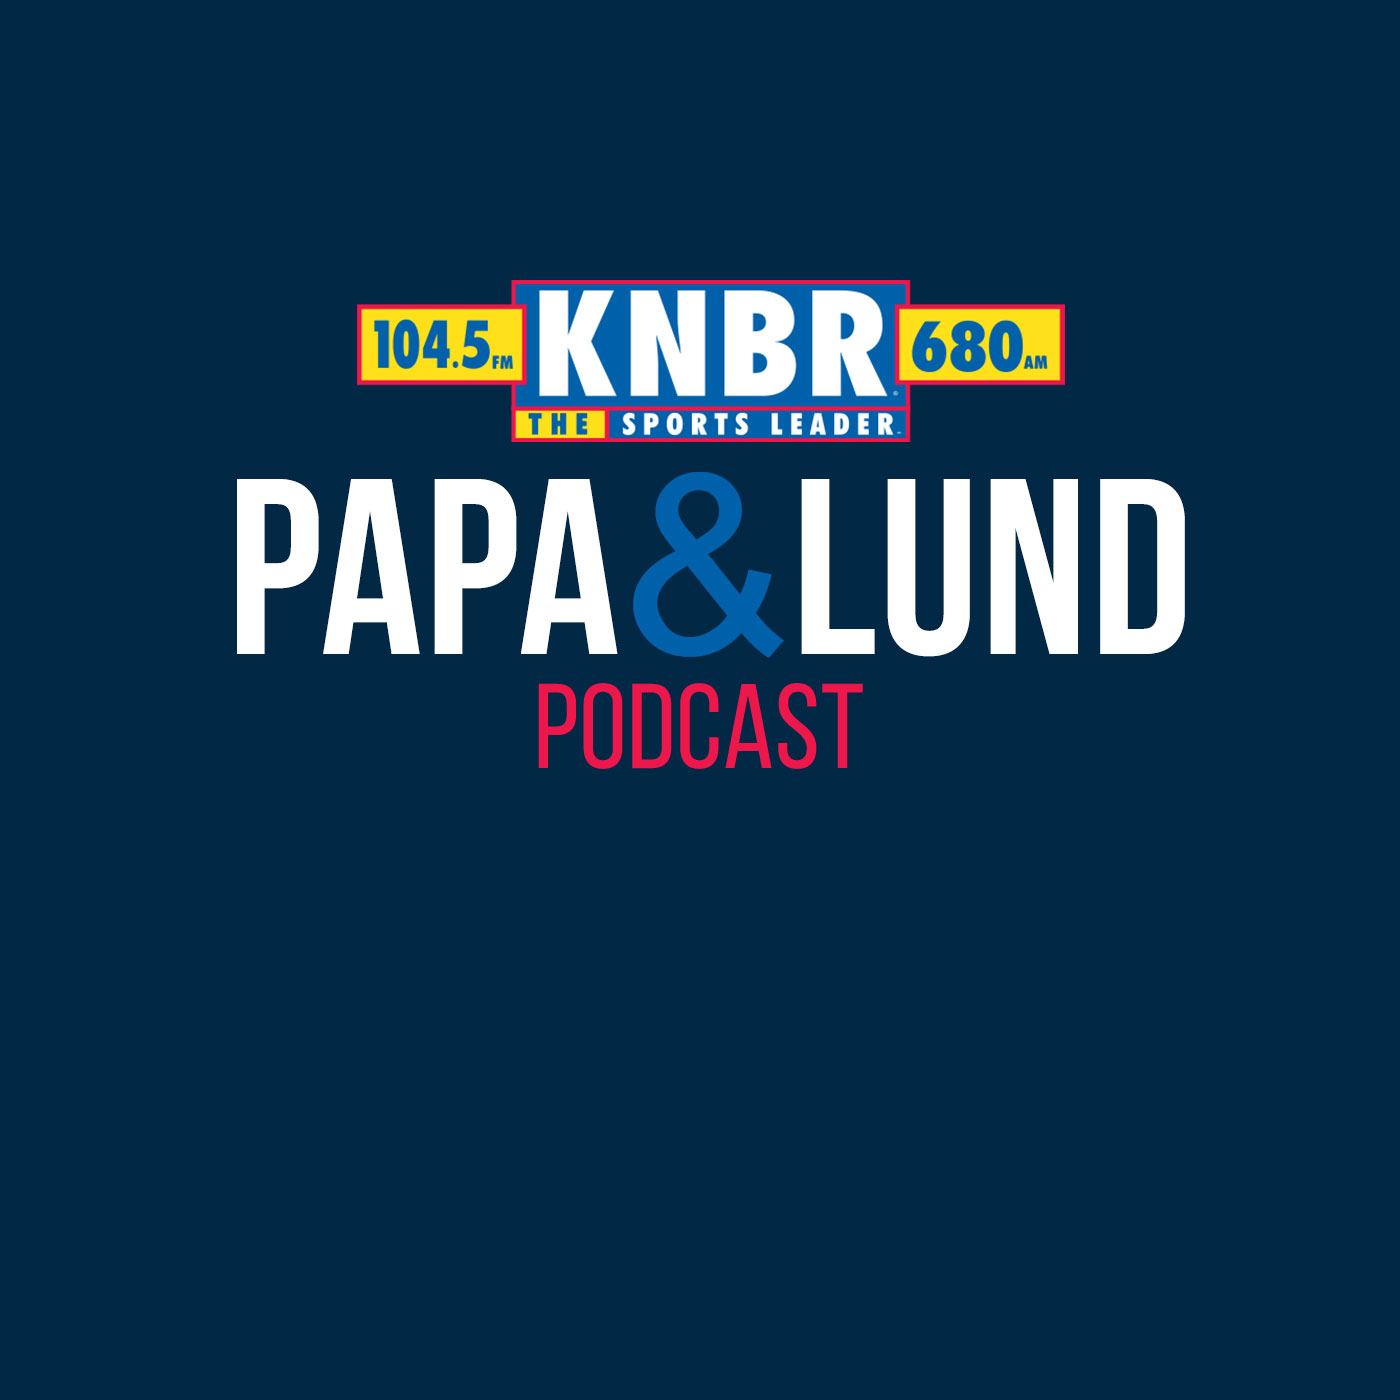 10-26 Dennis Brown joins Papa & Lund to discuss how the 49ers can keep the good times rolling against the LA Rams at Levi's South